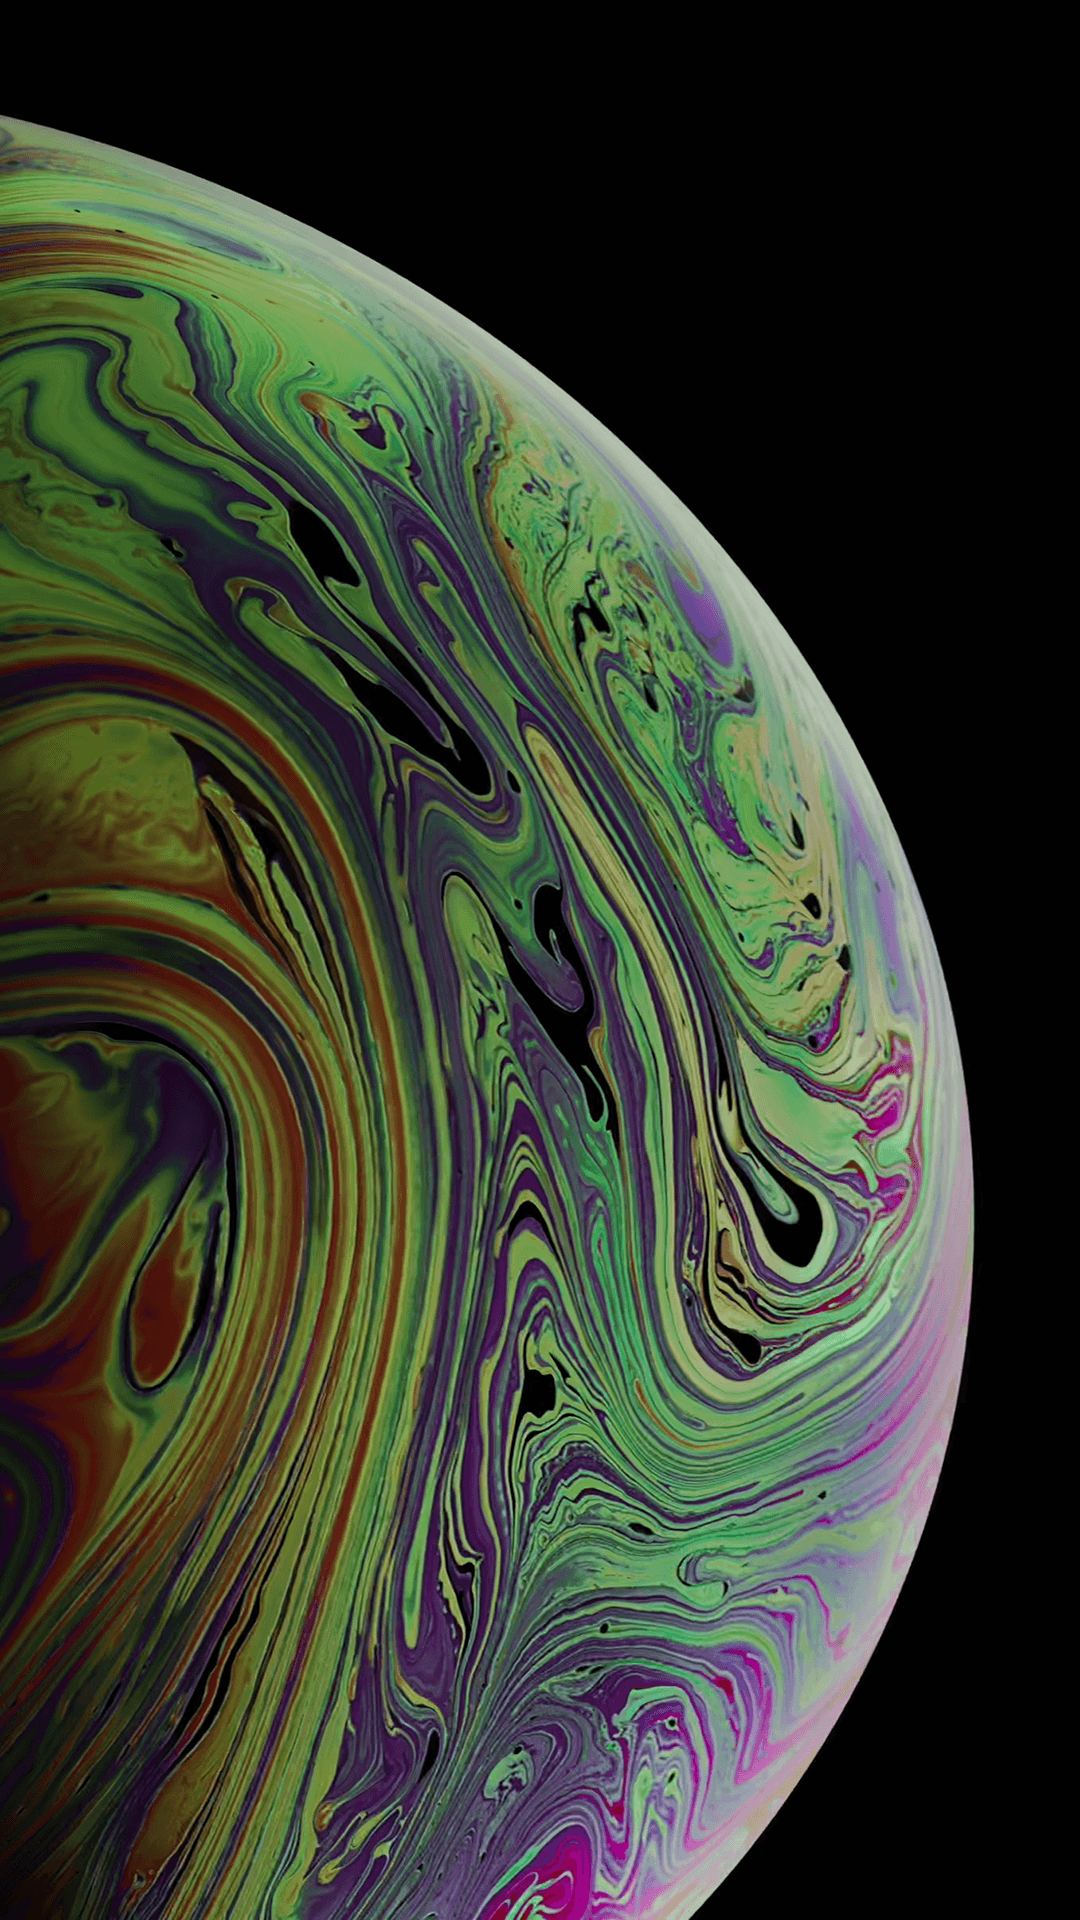 iPhone XS Max Wallpapers - Wallpaper Cave